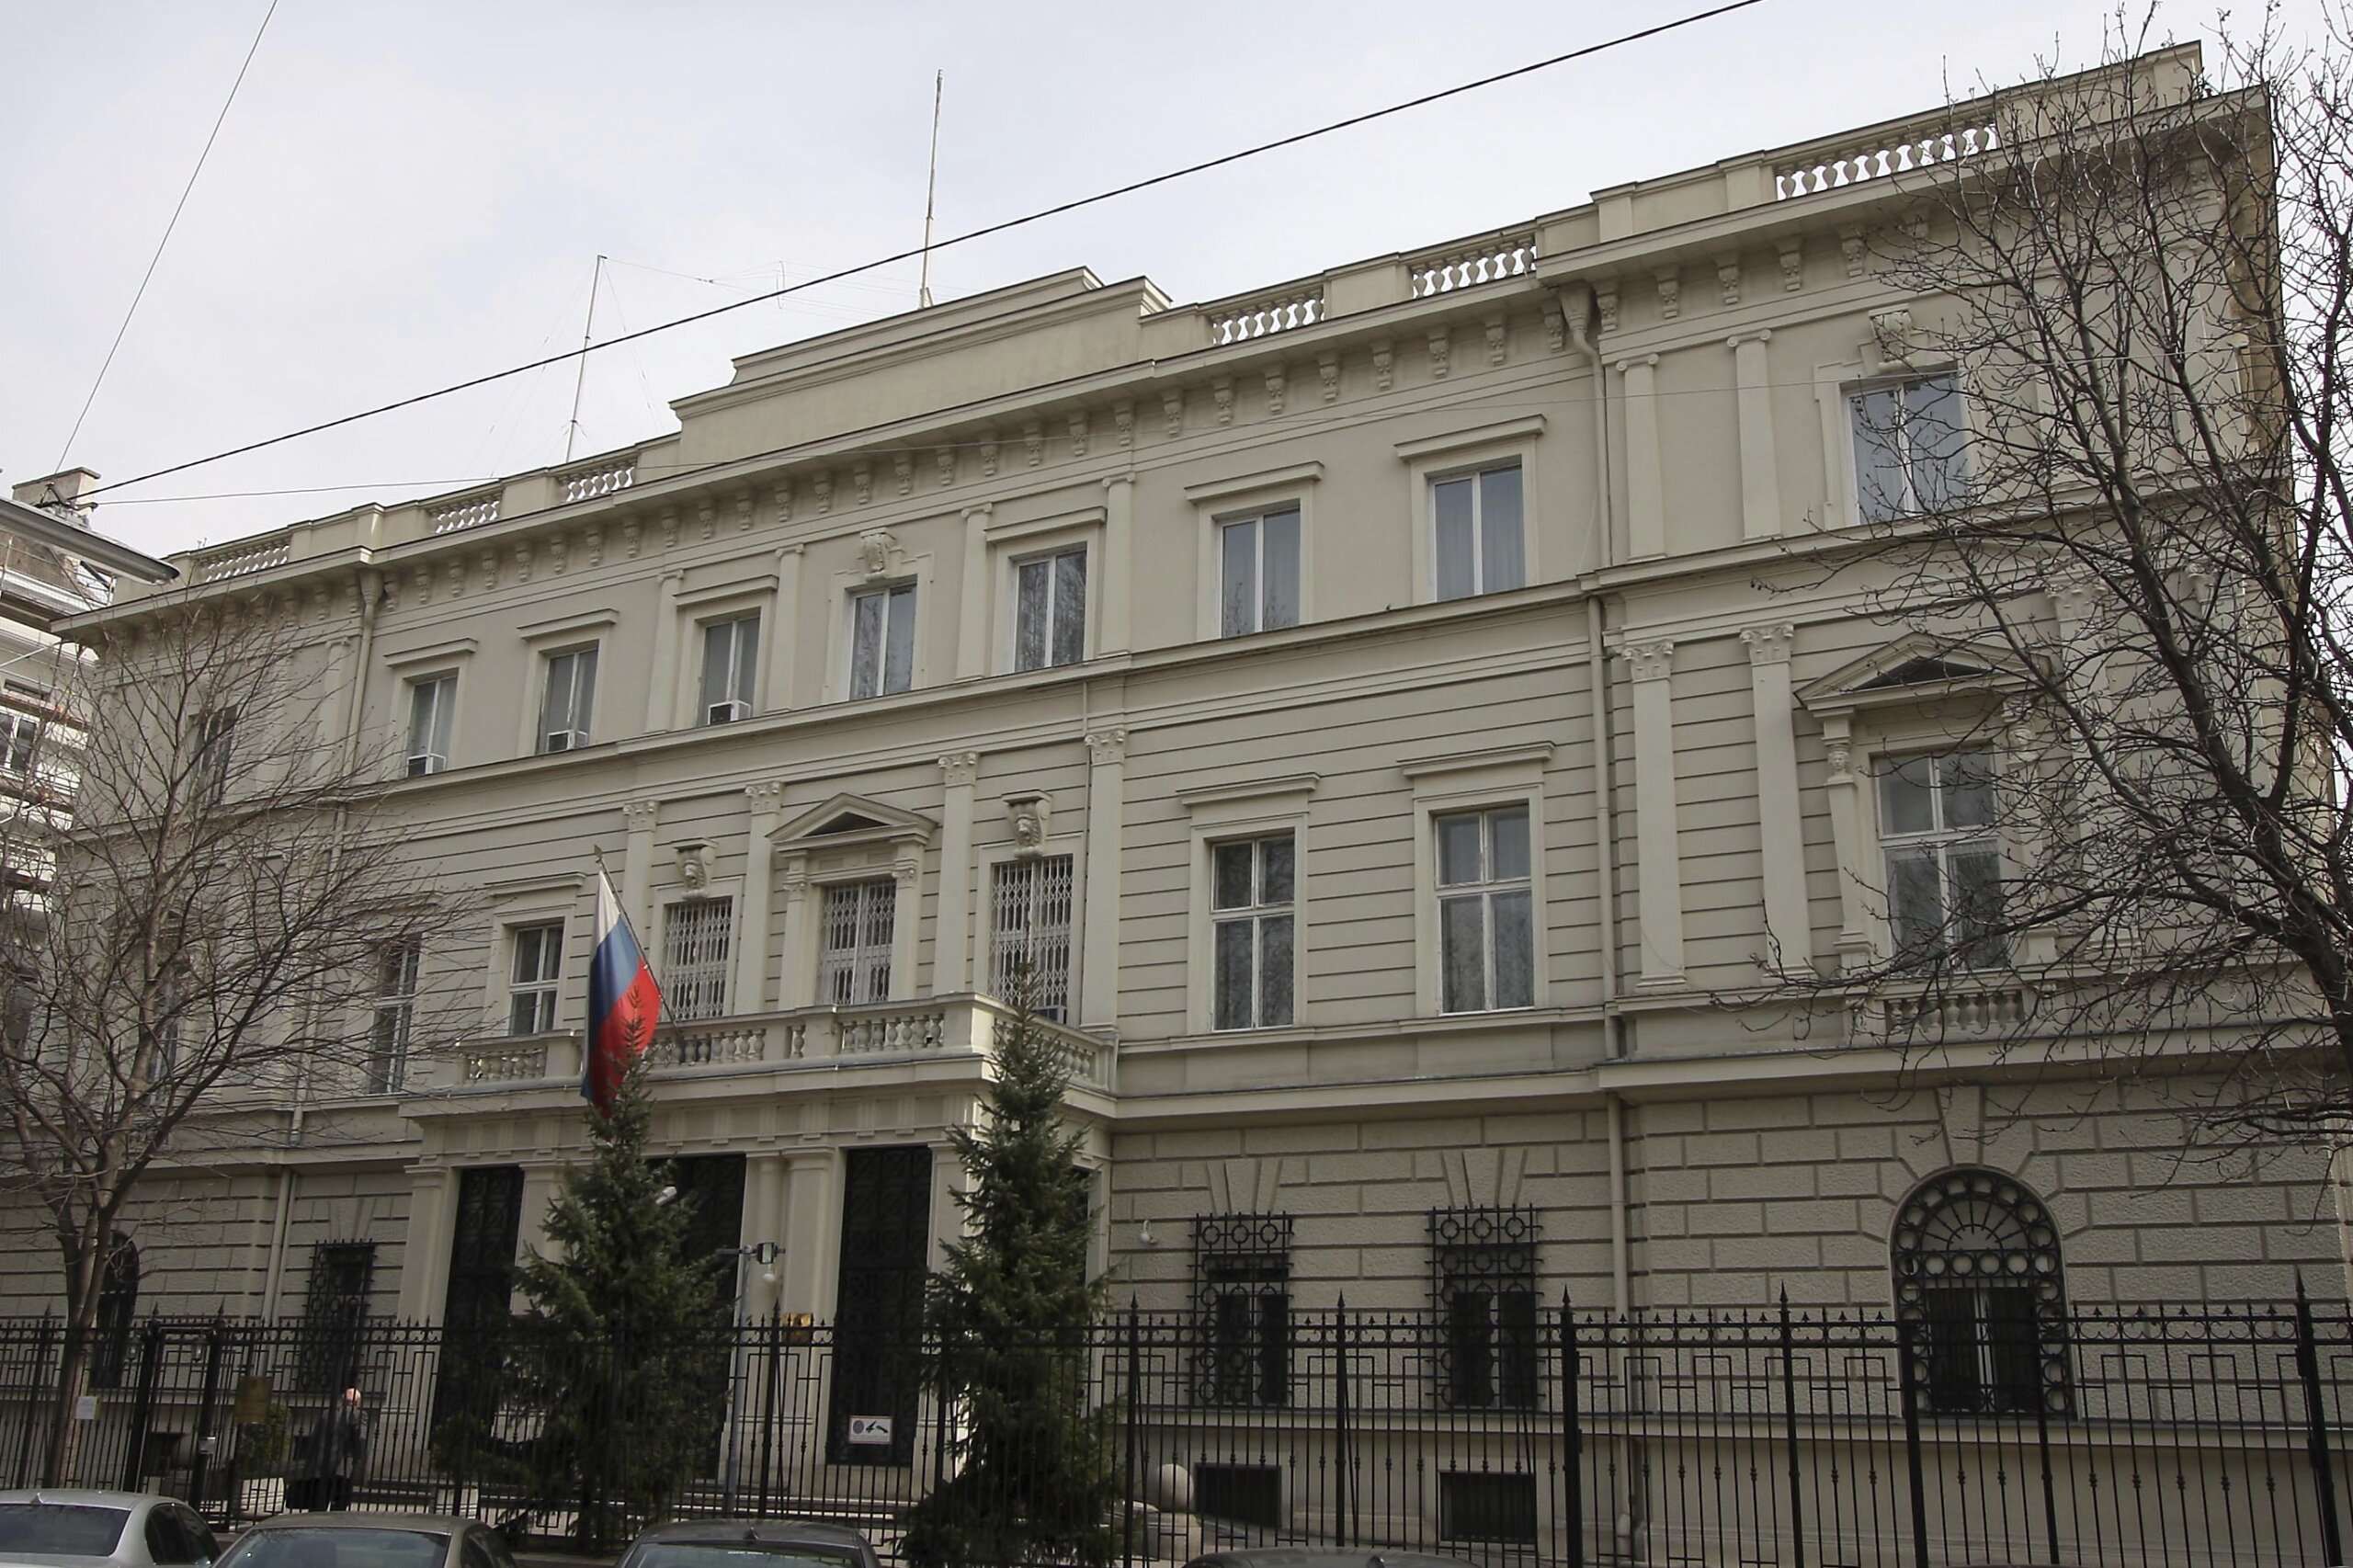 Austria expels 4 Russian diplomats based in Vienna